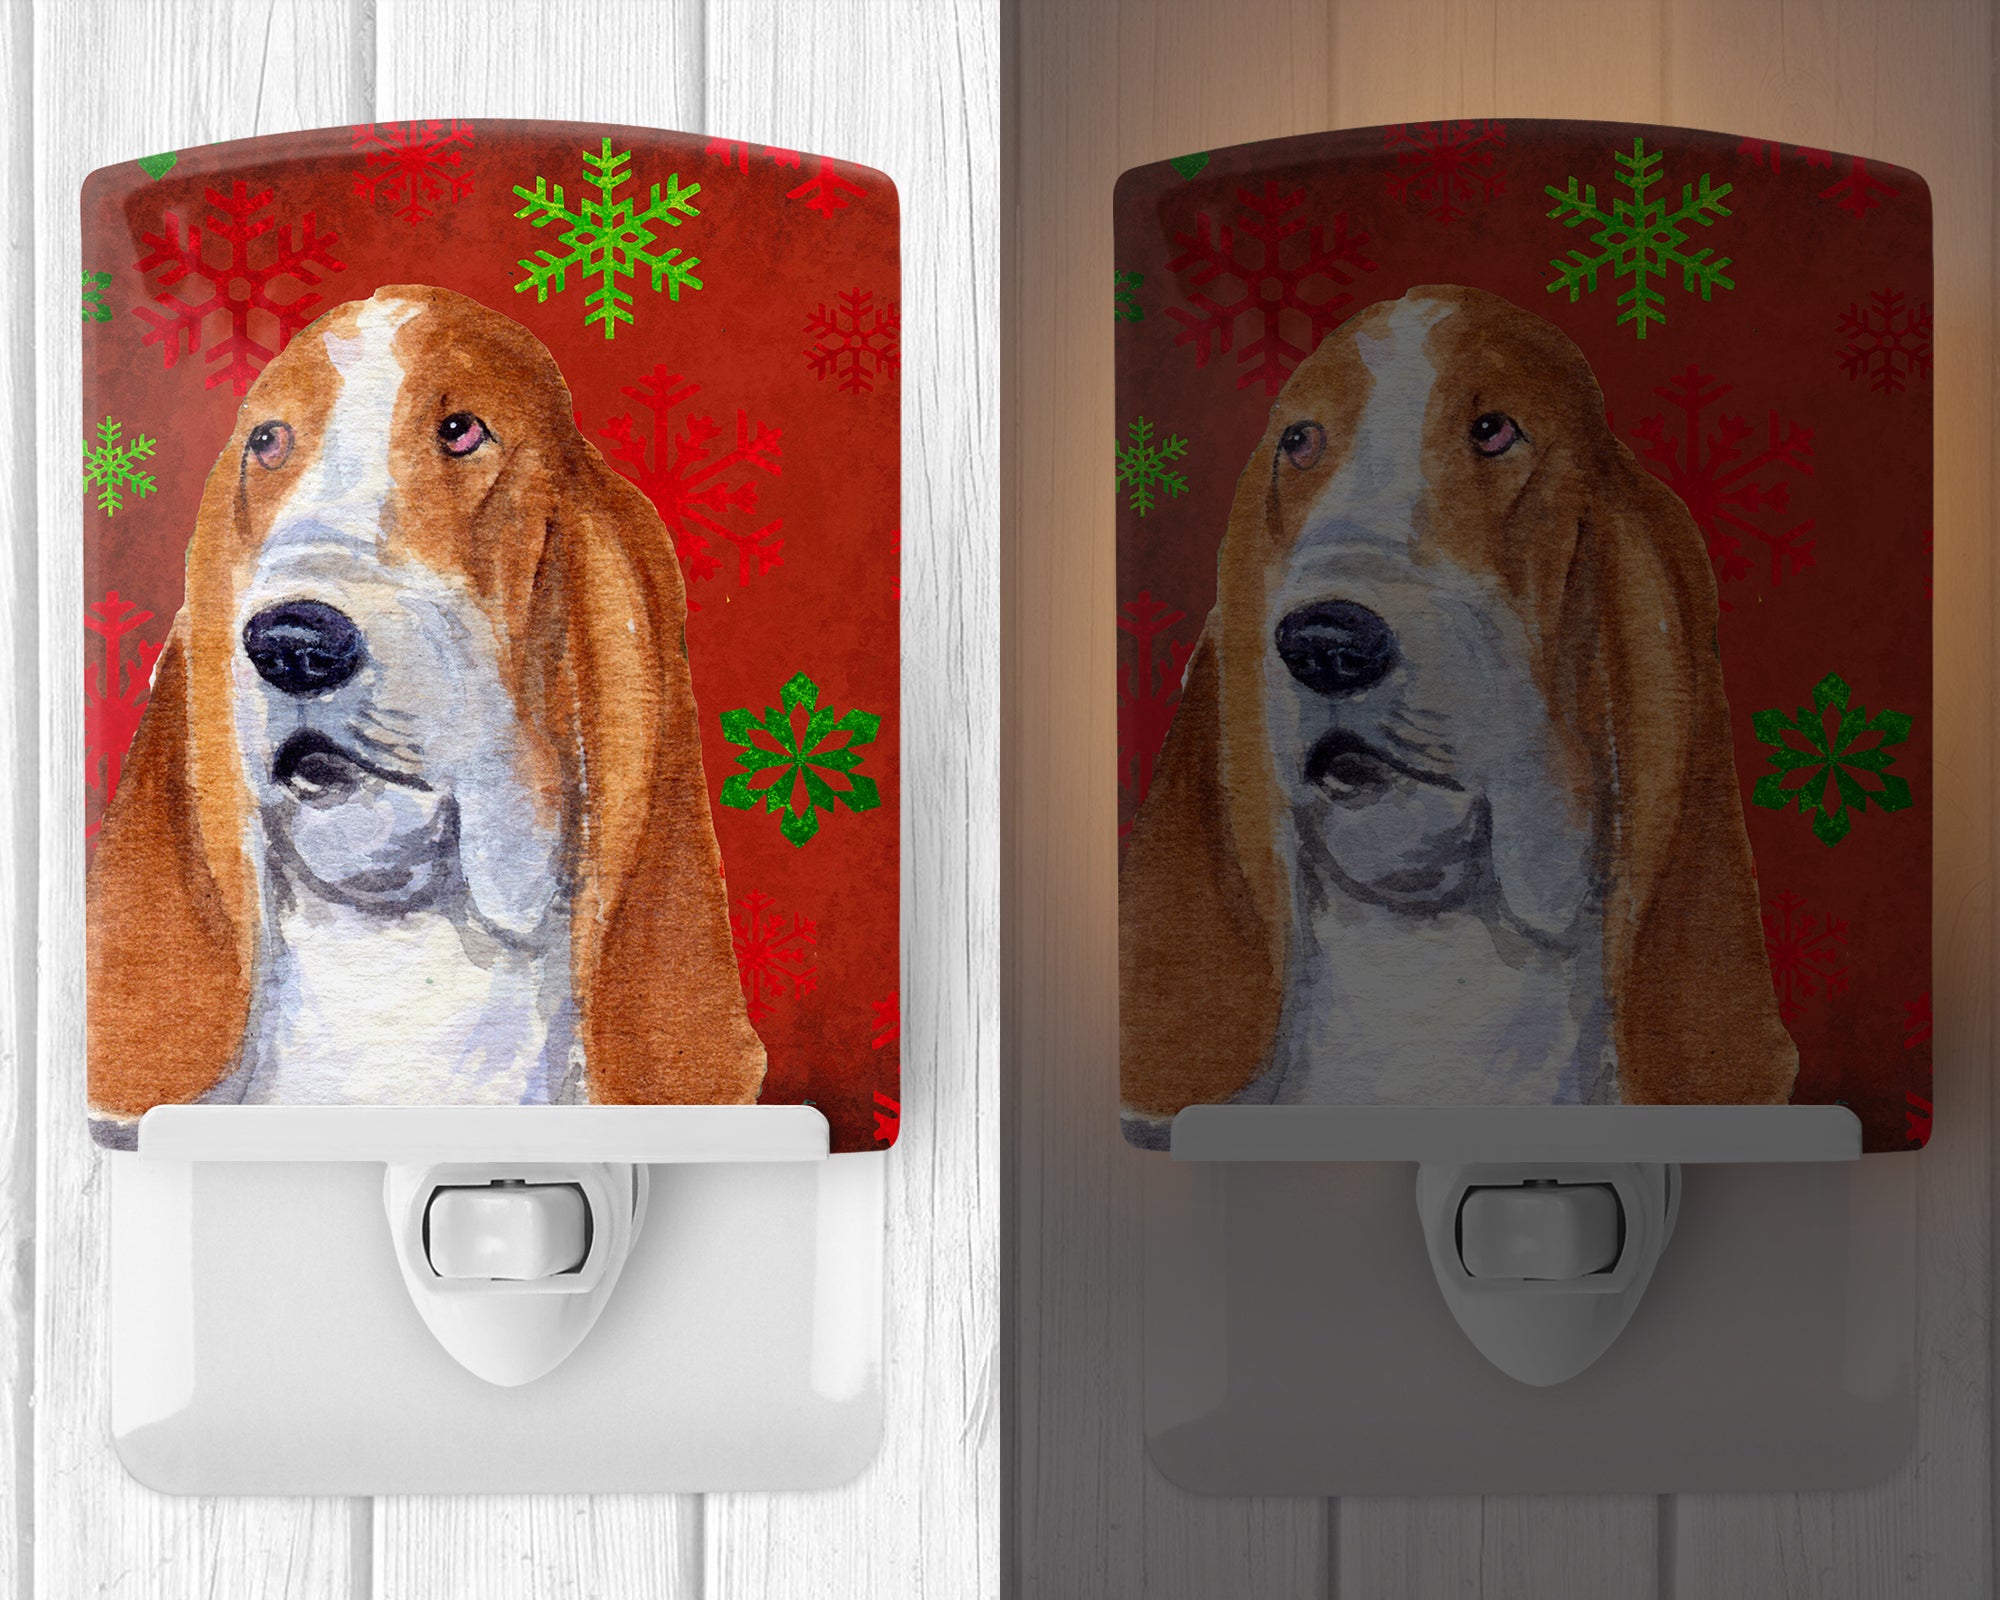 Basset Hound Red and Green Snowflakes Holiday Christmas Ceramic Night Light SS4735CNL - the-store.com